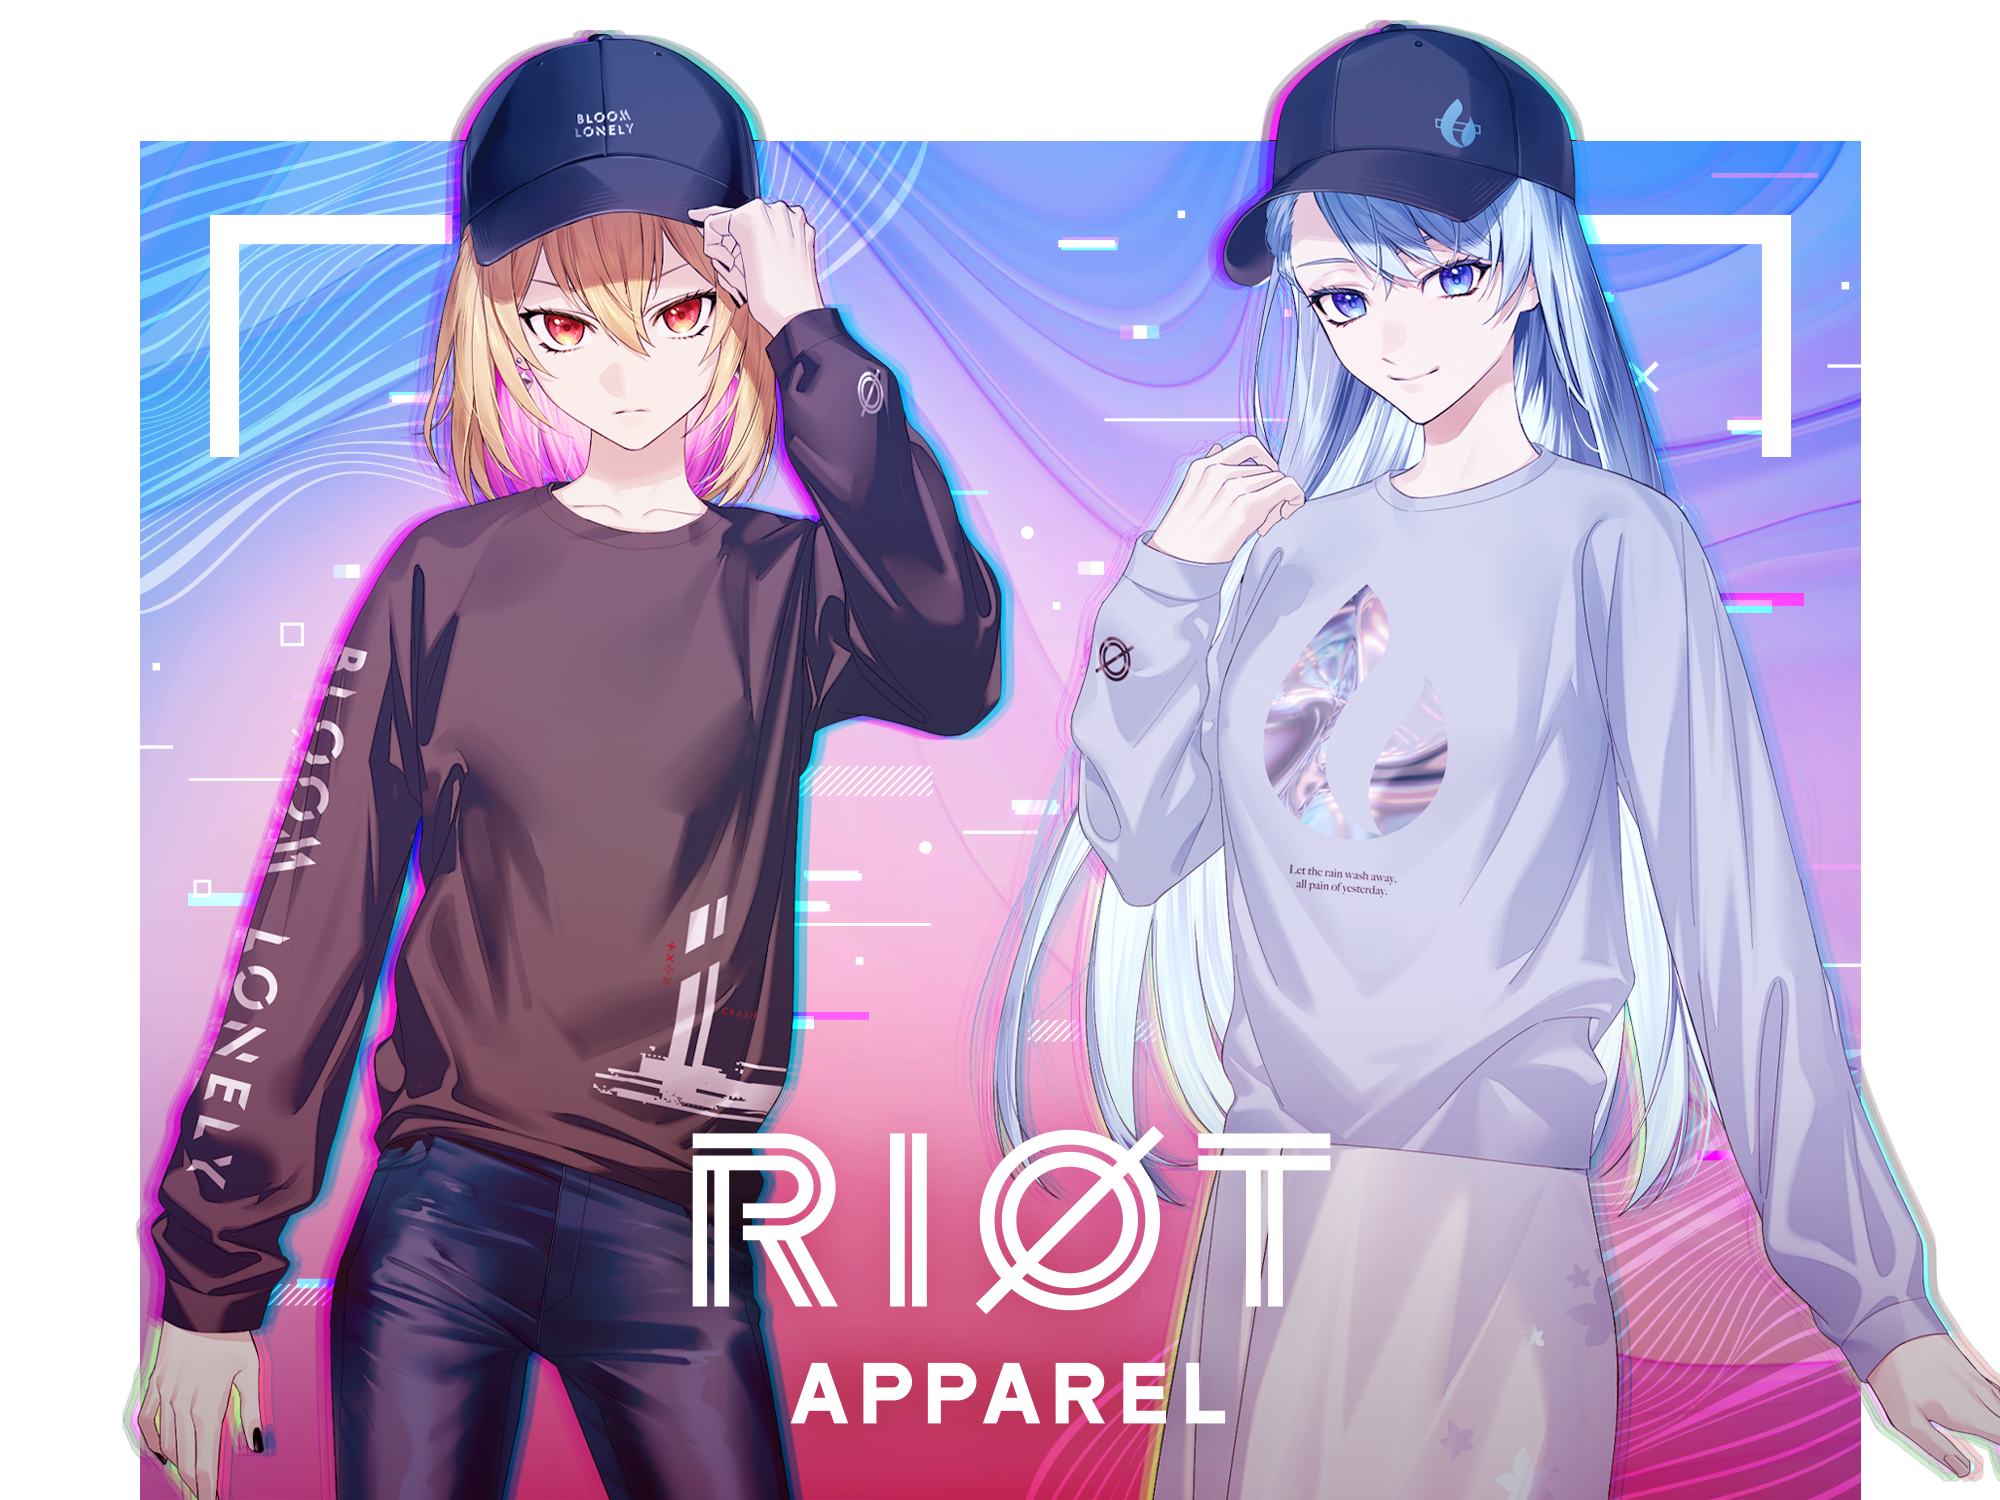 RIOT APPAREL Capsule Collectionの発売が決定！芦澤サキと凪原涼菜の